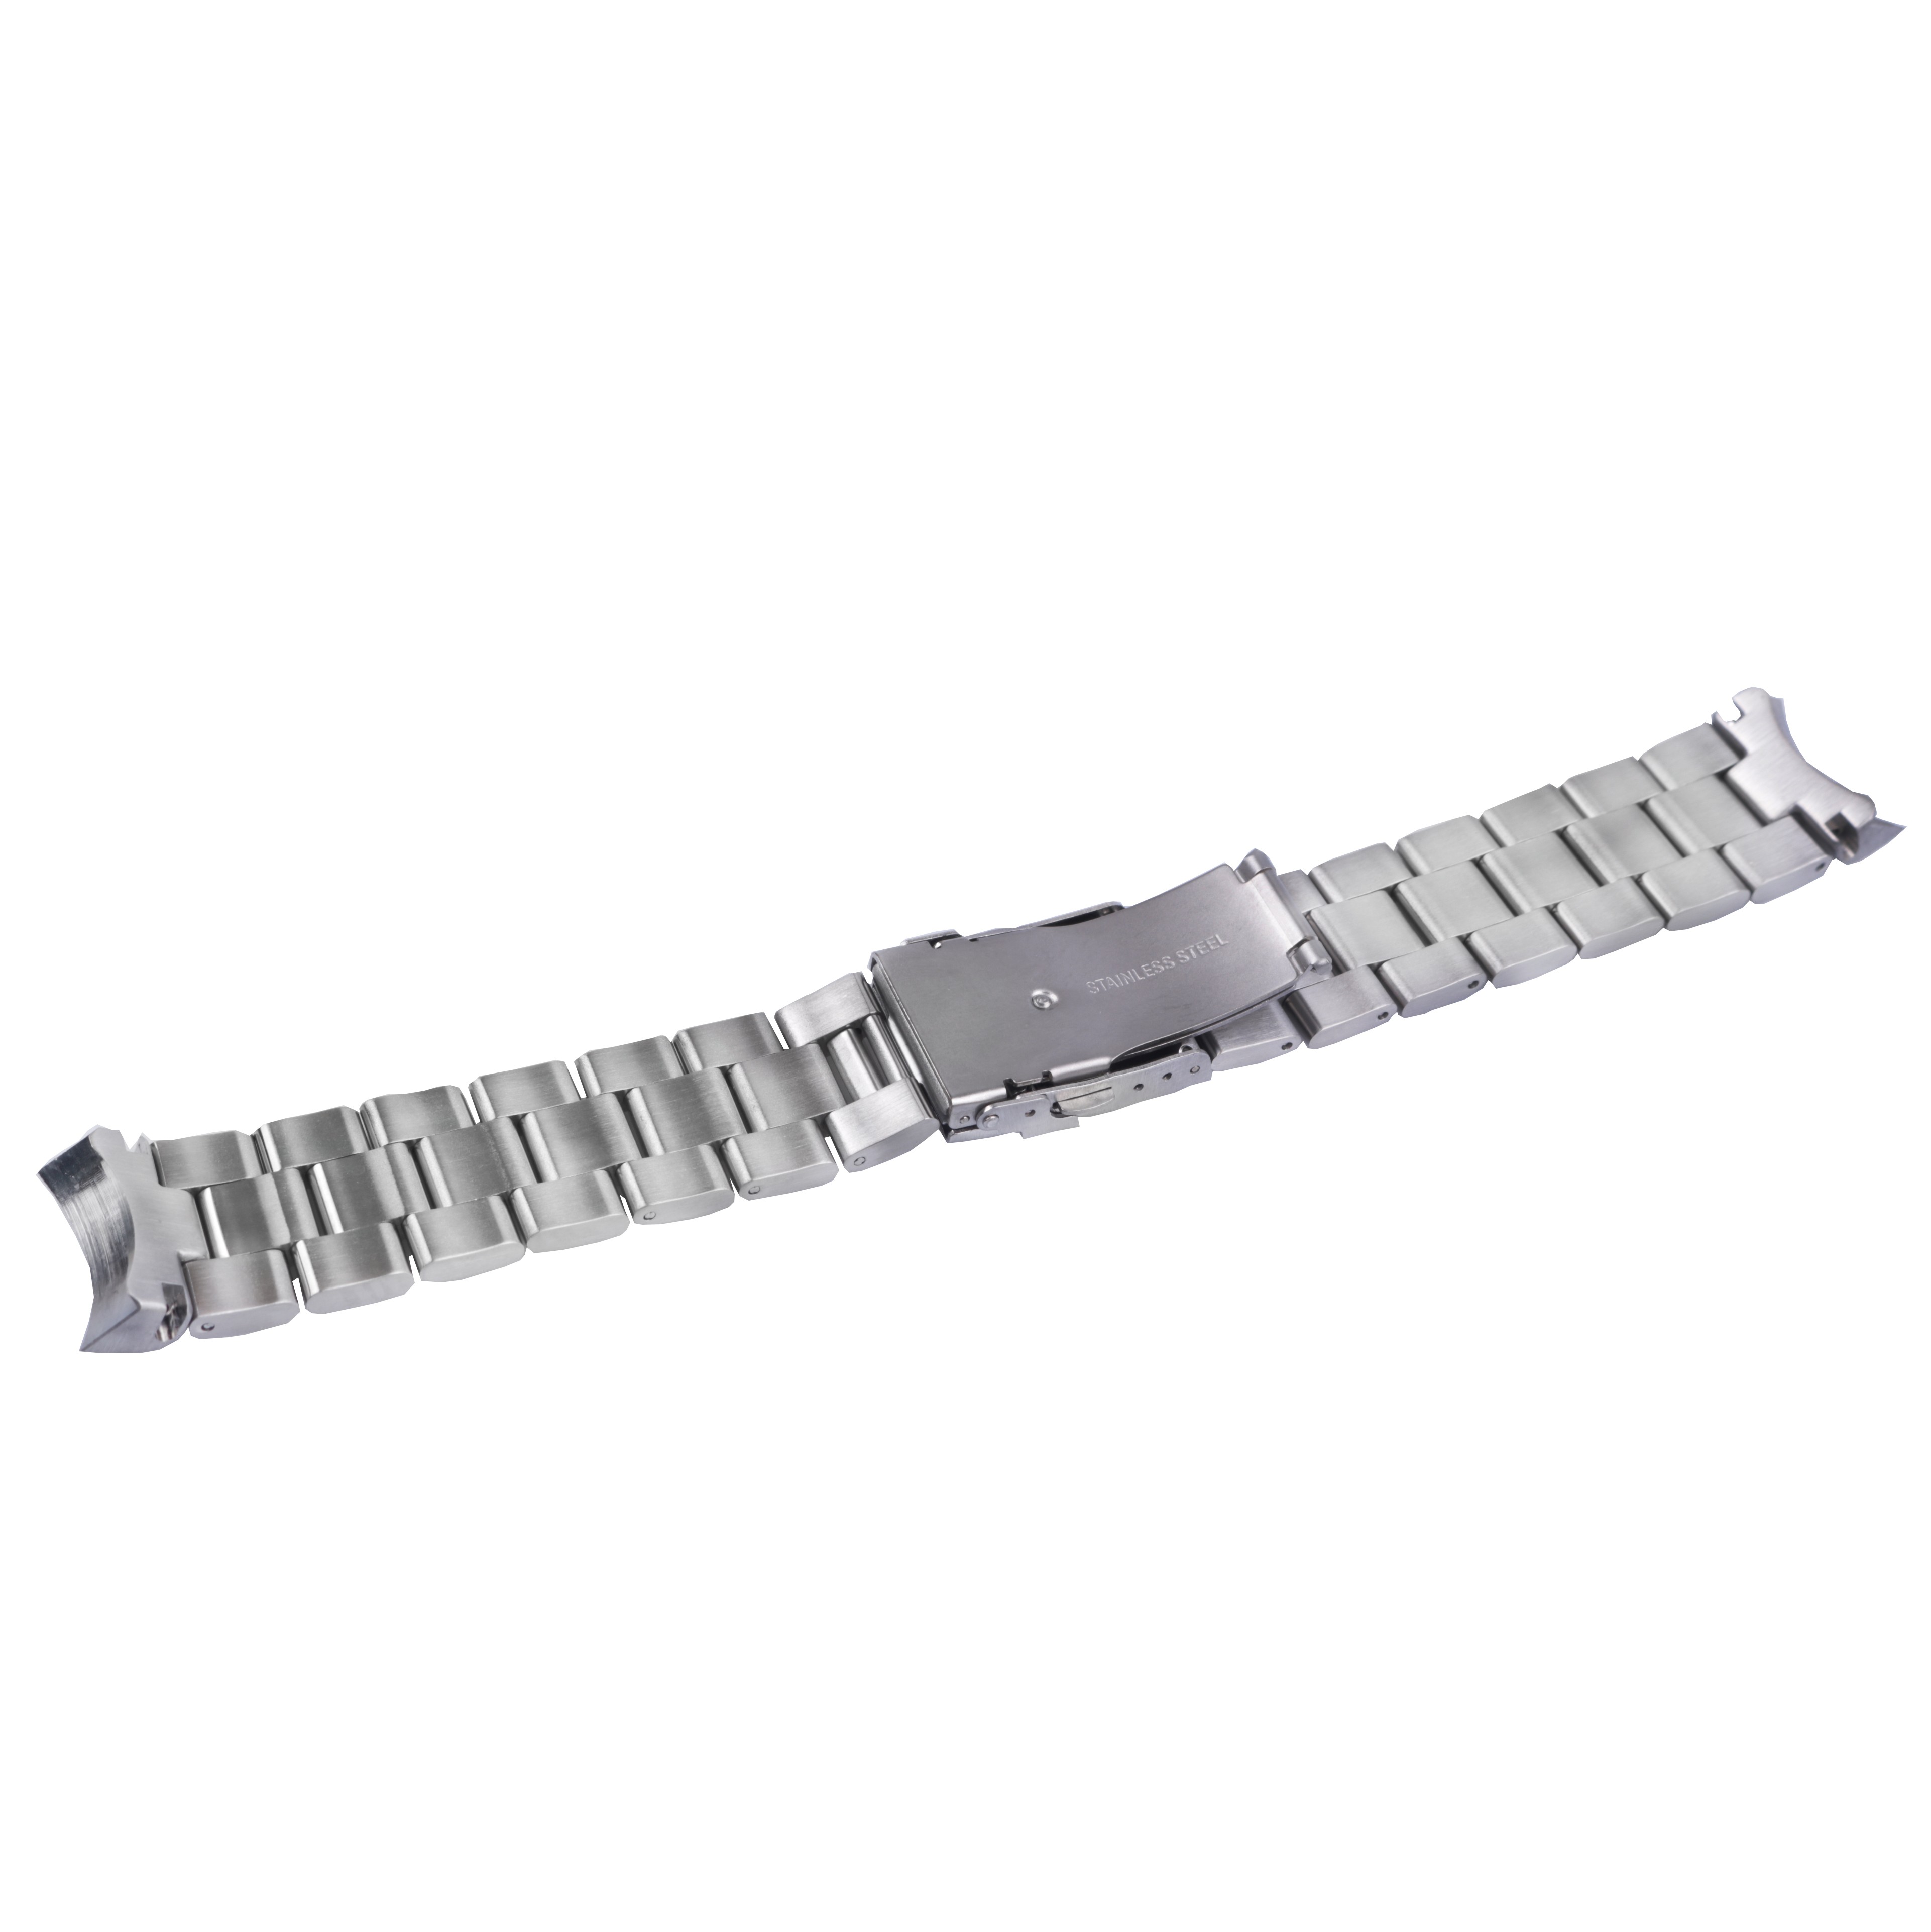 Rolamy 22mm Sliver All Brush Stainless Steel Wrist Watch Band Replacement Metal Watchband Bracelet Double Push Clasp for Seiko